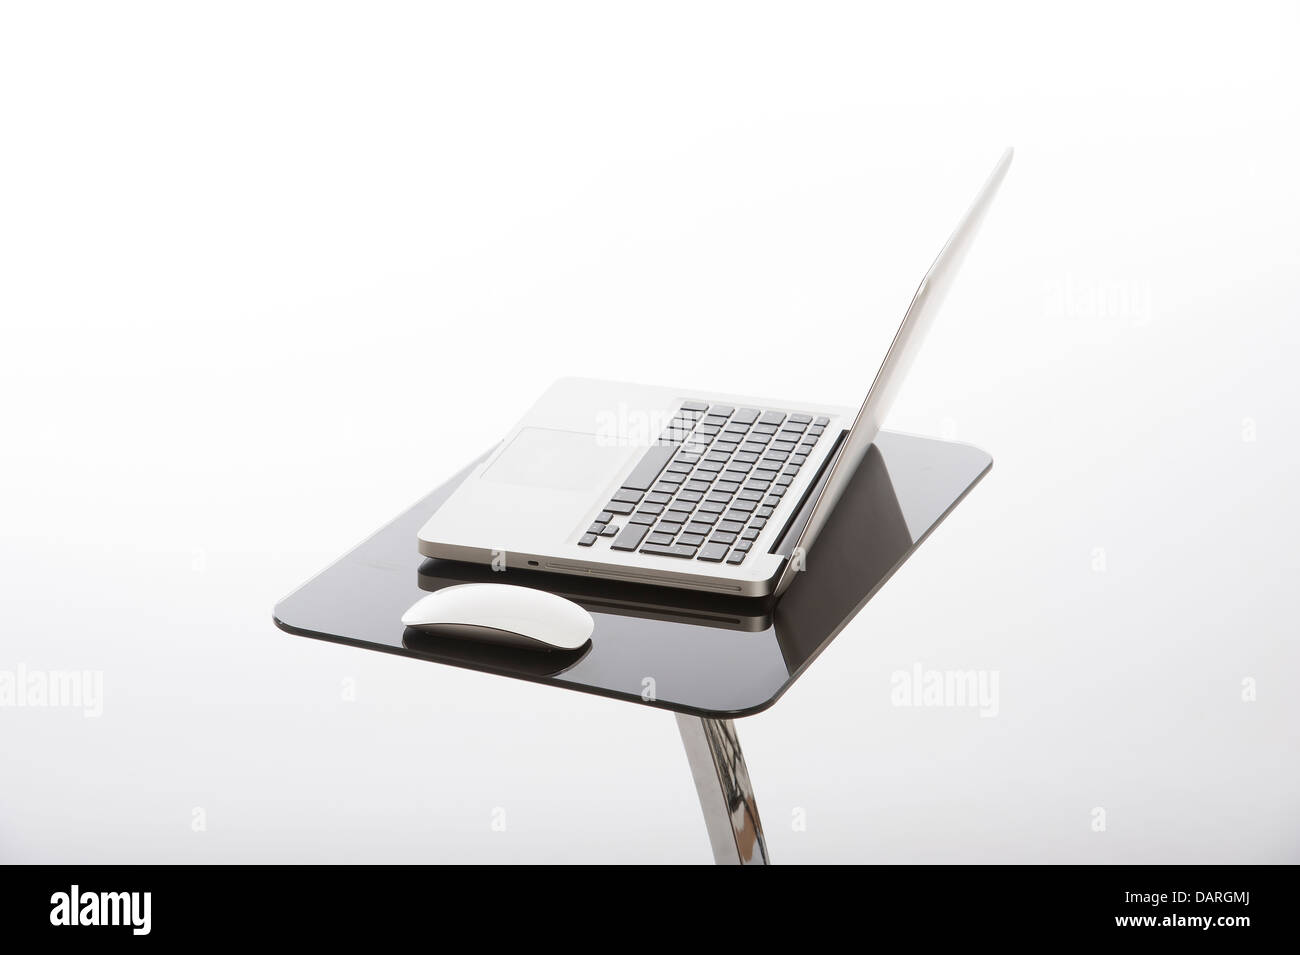 Laptop Computer And Mouse Standing On A Glass Table Stock Photo